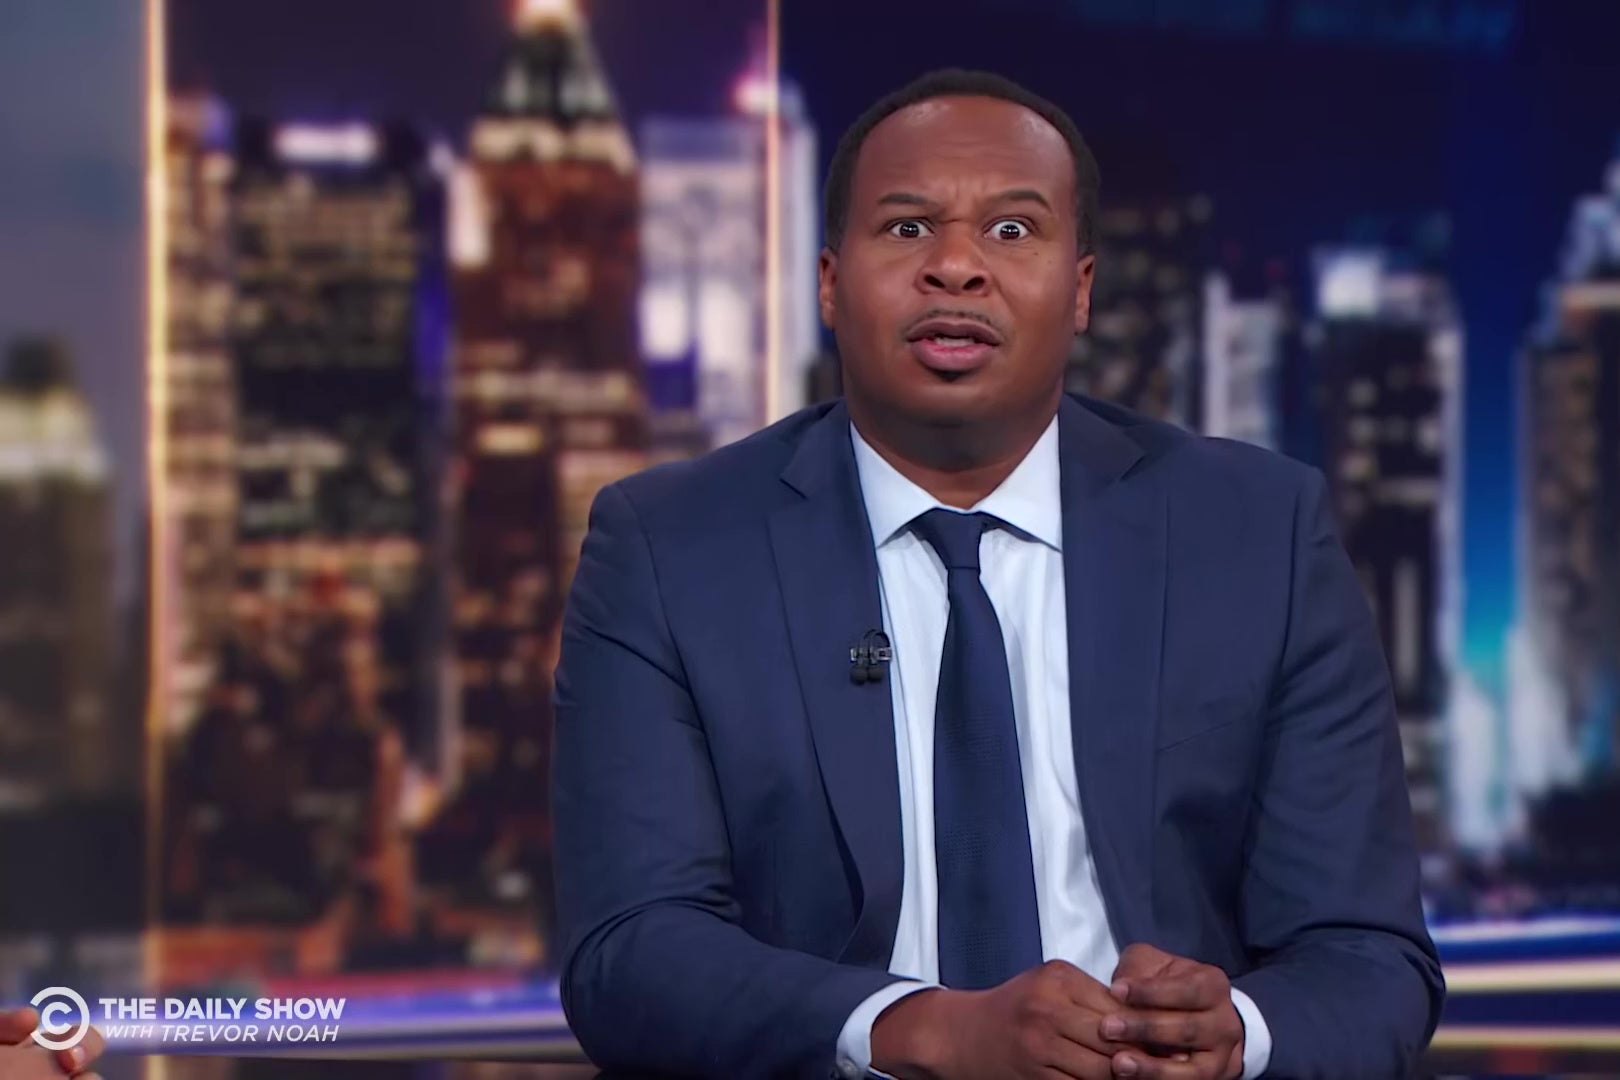 Roy Wood Jr. makes a cartoonish face of disgust.